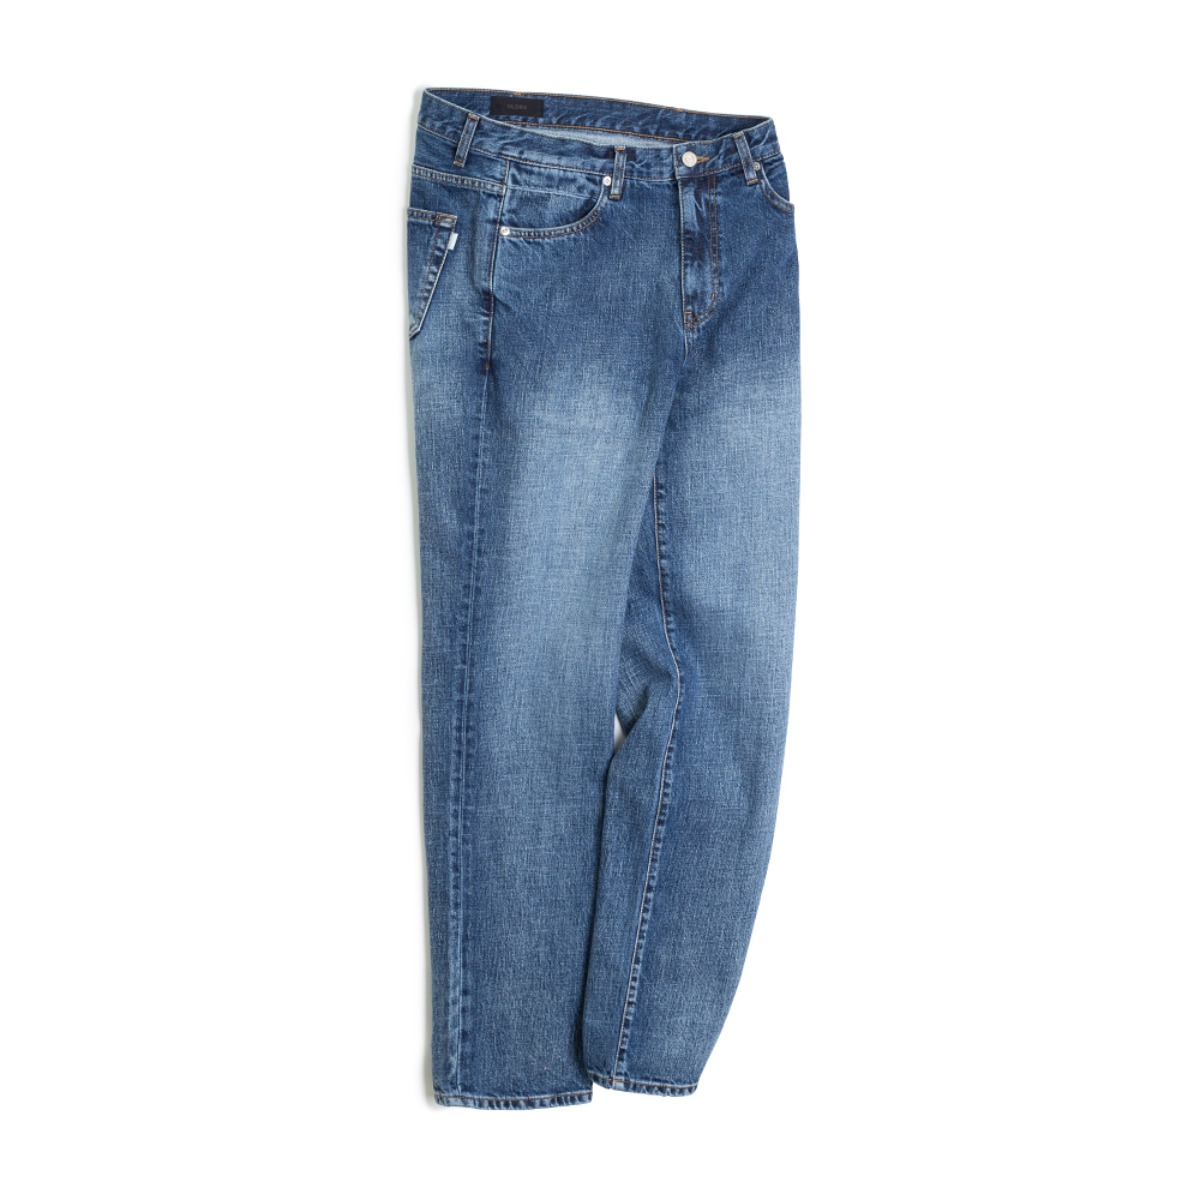  TYPE4 STRAIGHT JEANS R6